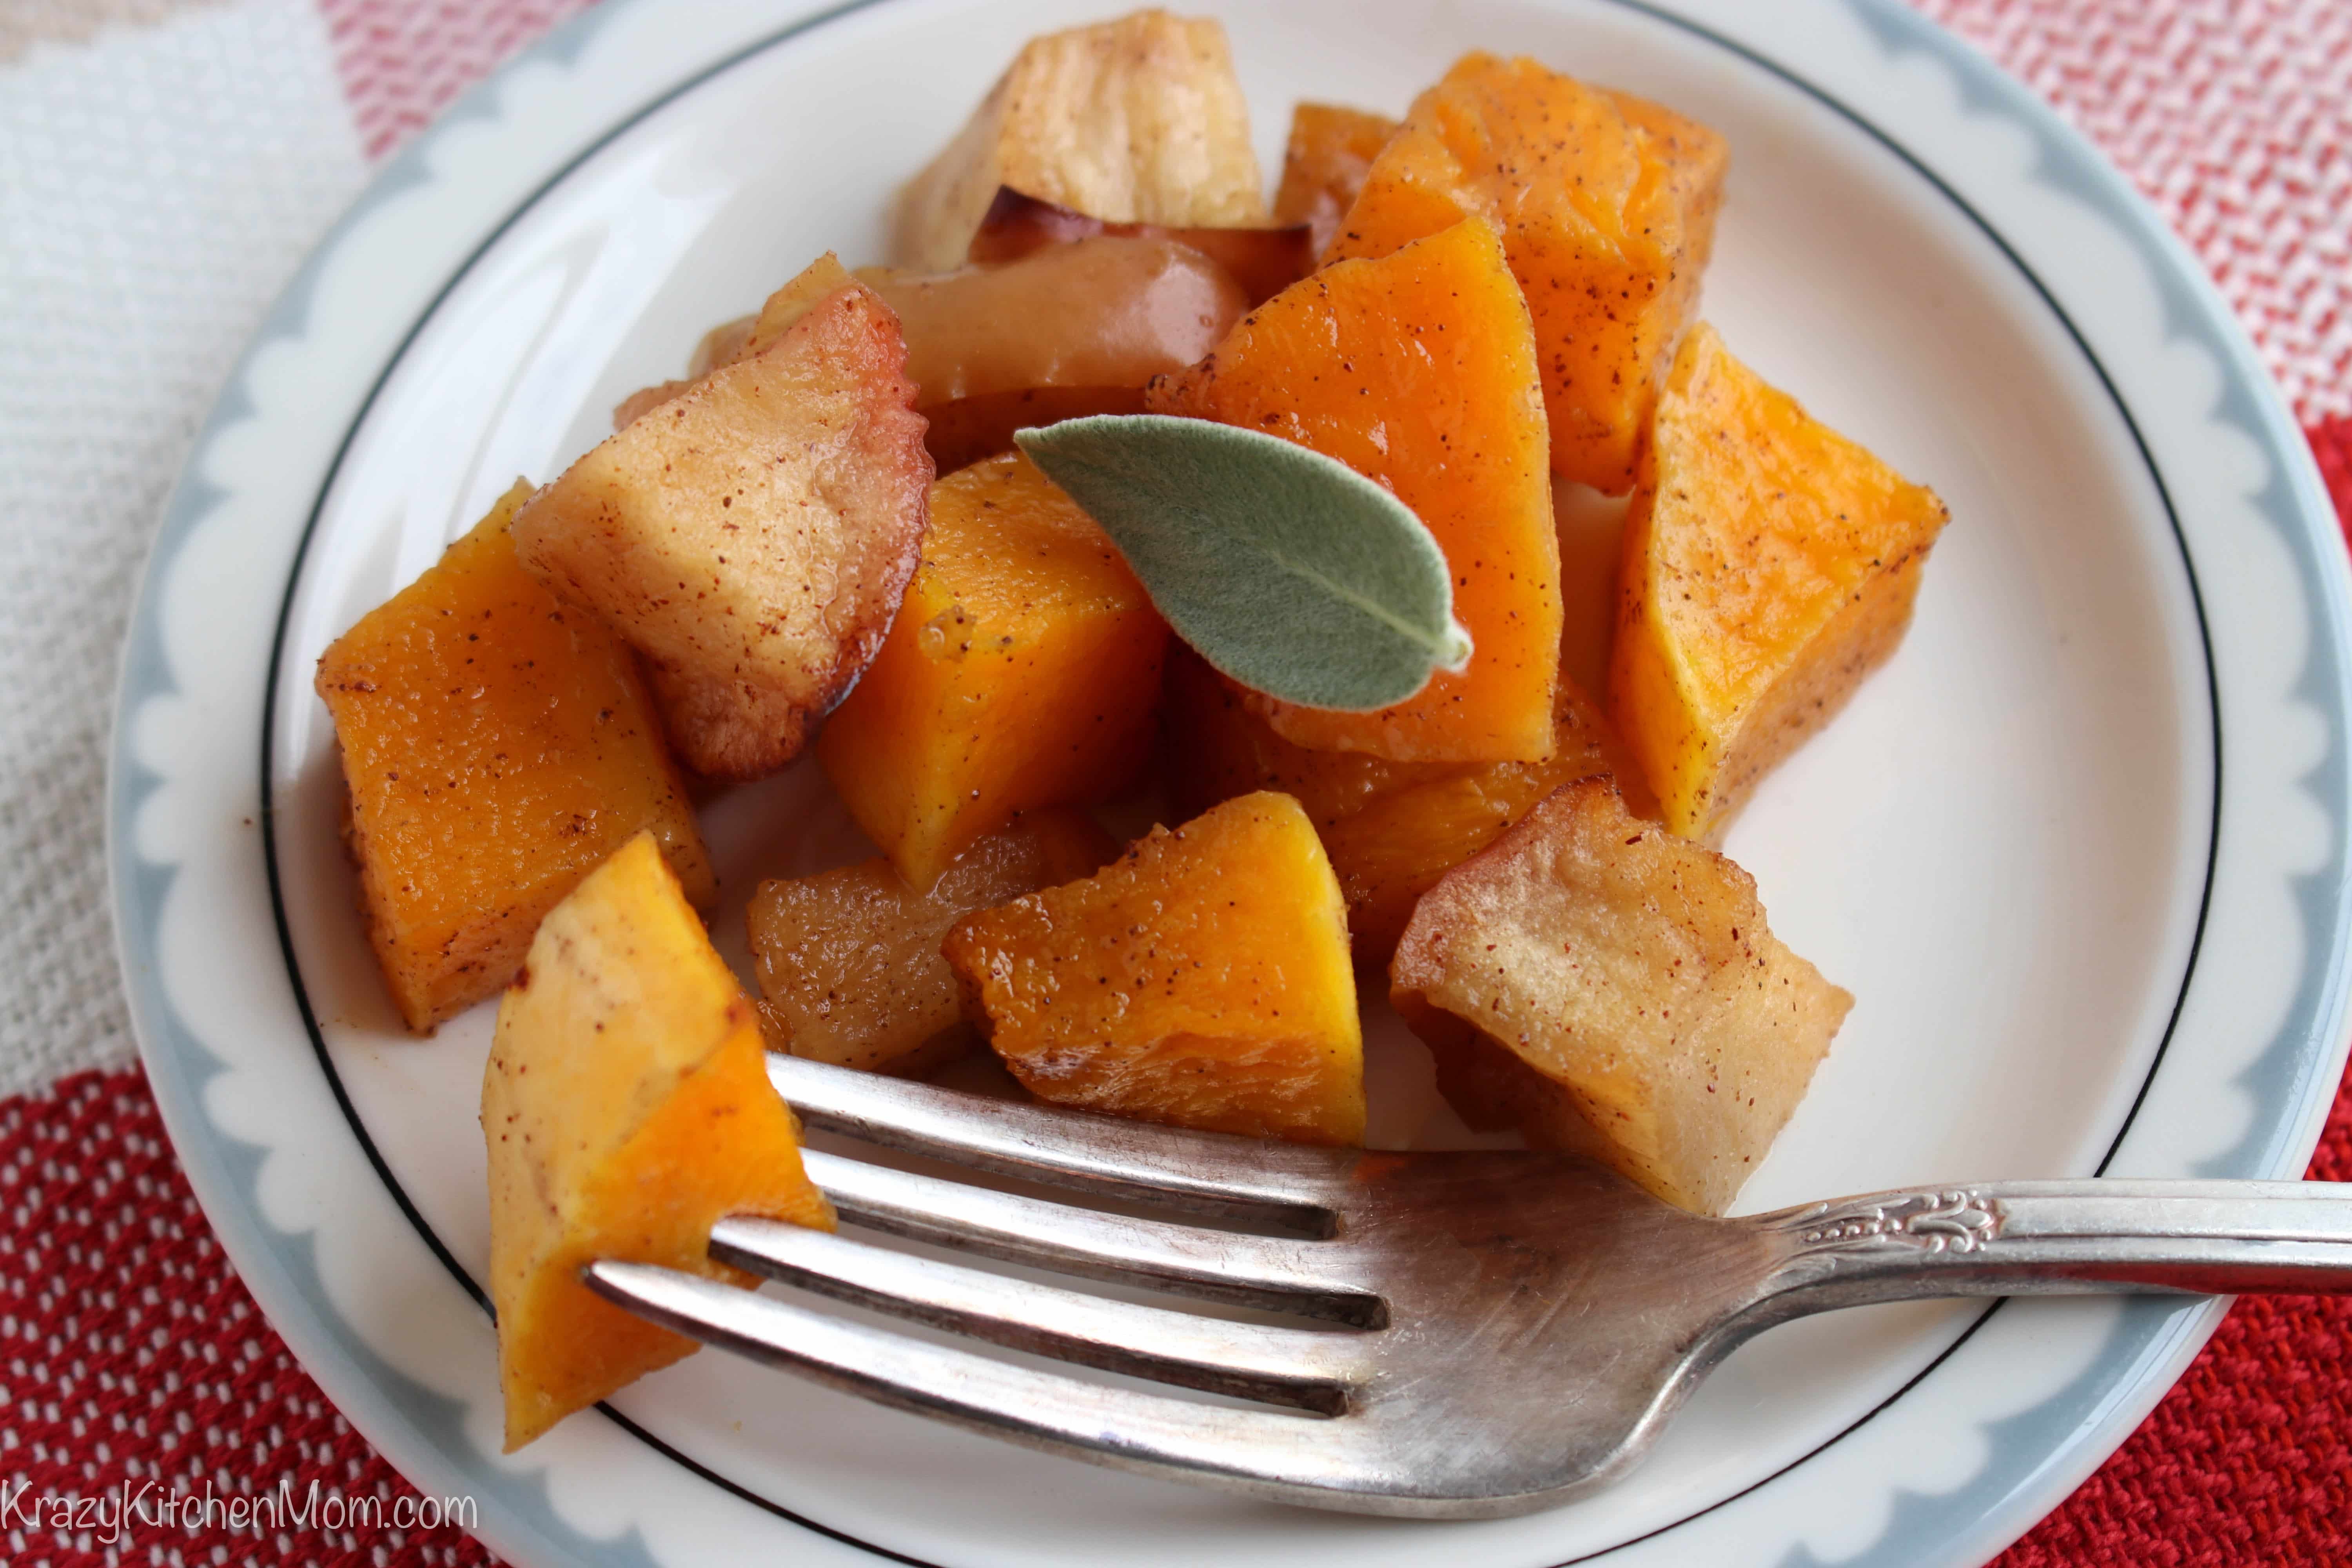 Roasted Butternut Squash and Apples